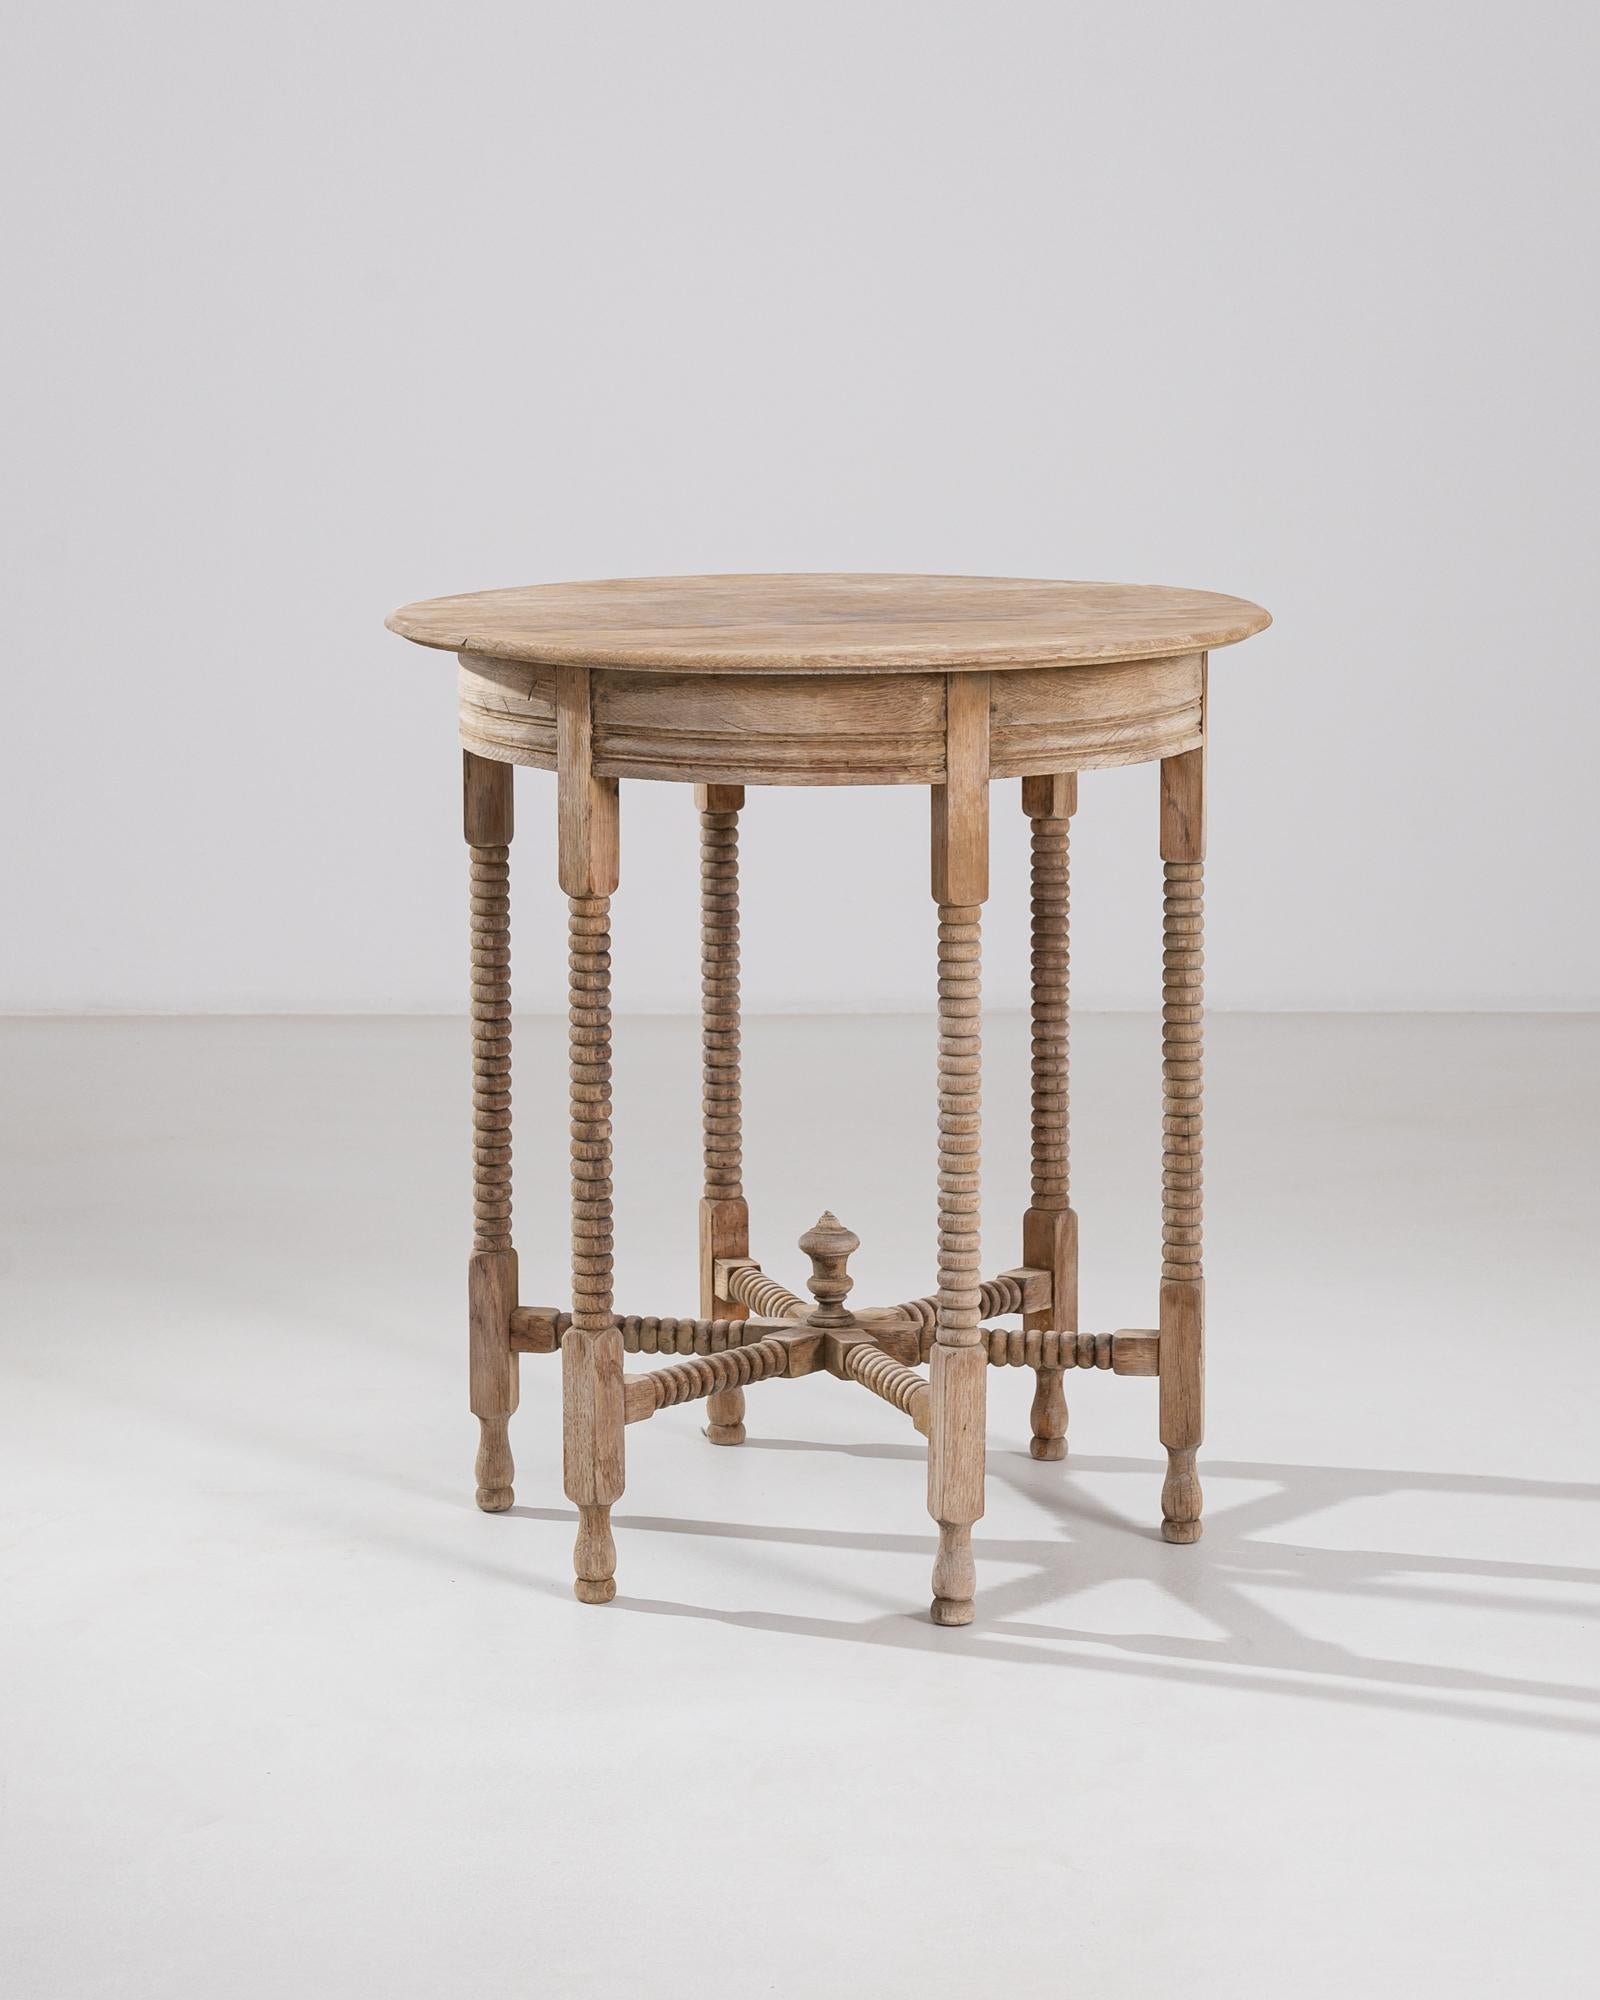 Crafted at the turn of the 19th century, this elegant piece was made in France. Turned legs are grouped in eight, ringed with a curved apron and interlocked below, the intricate geometry multiplies the clean lines of the piece’s silhouette. The wood